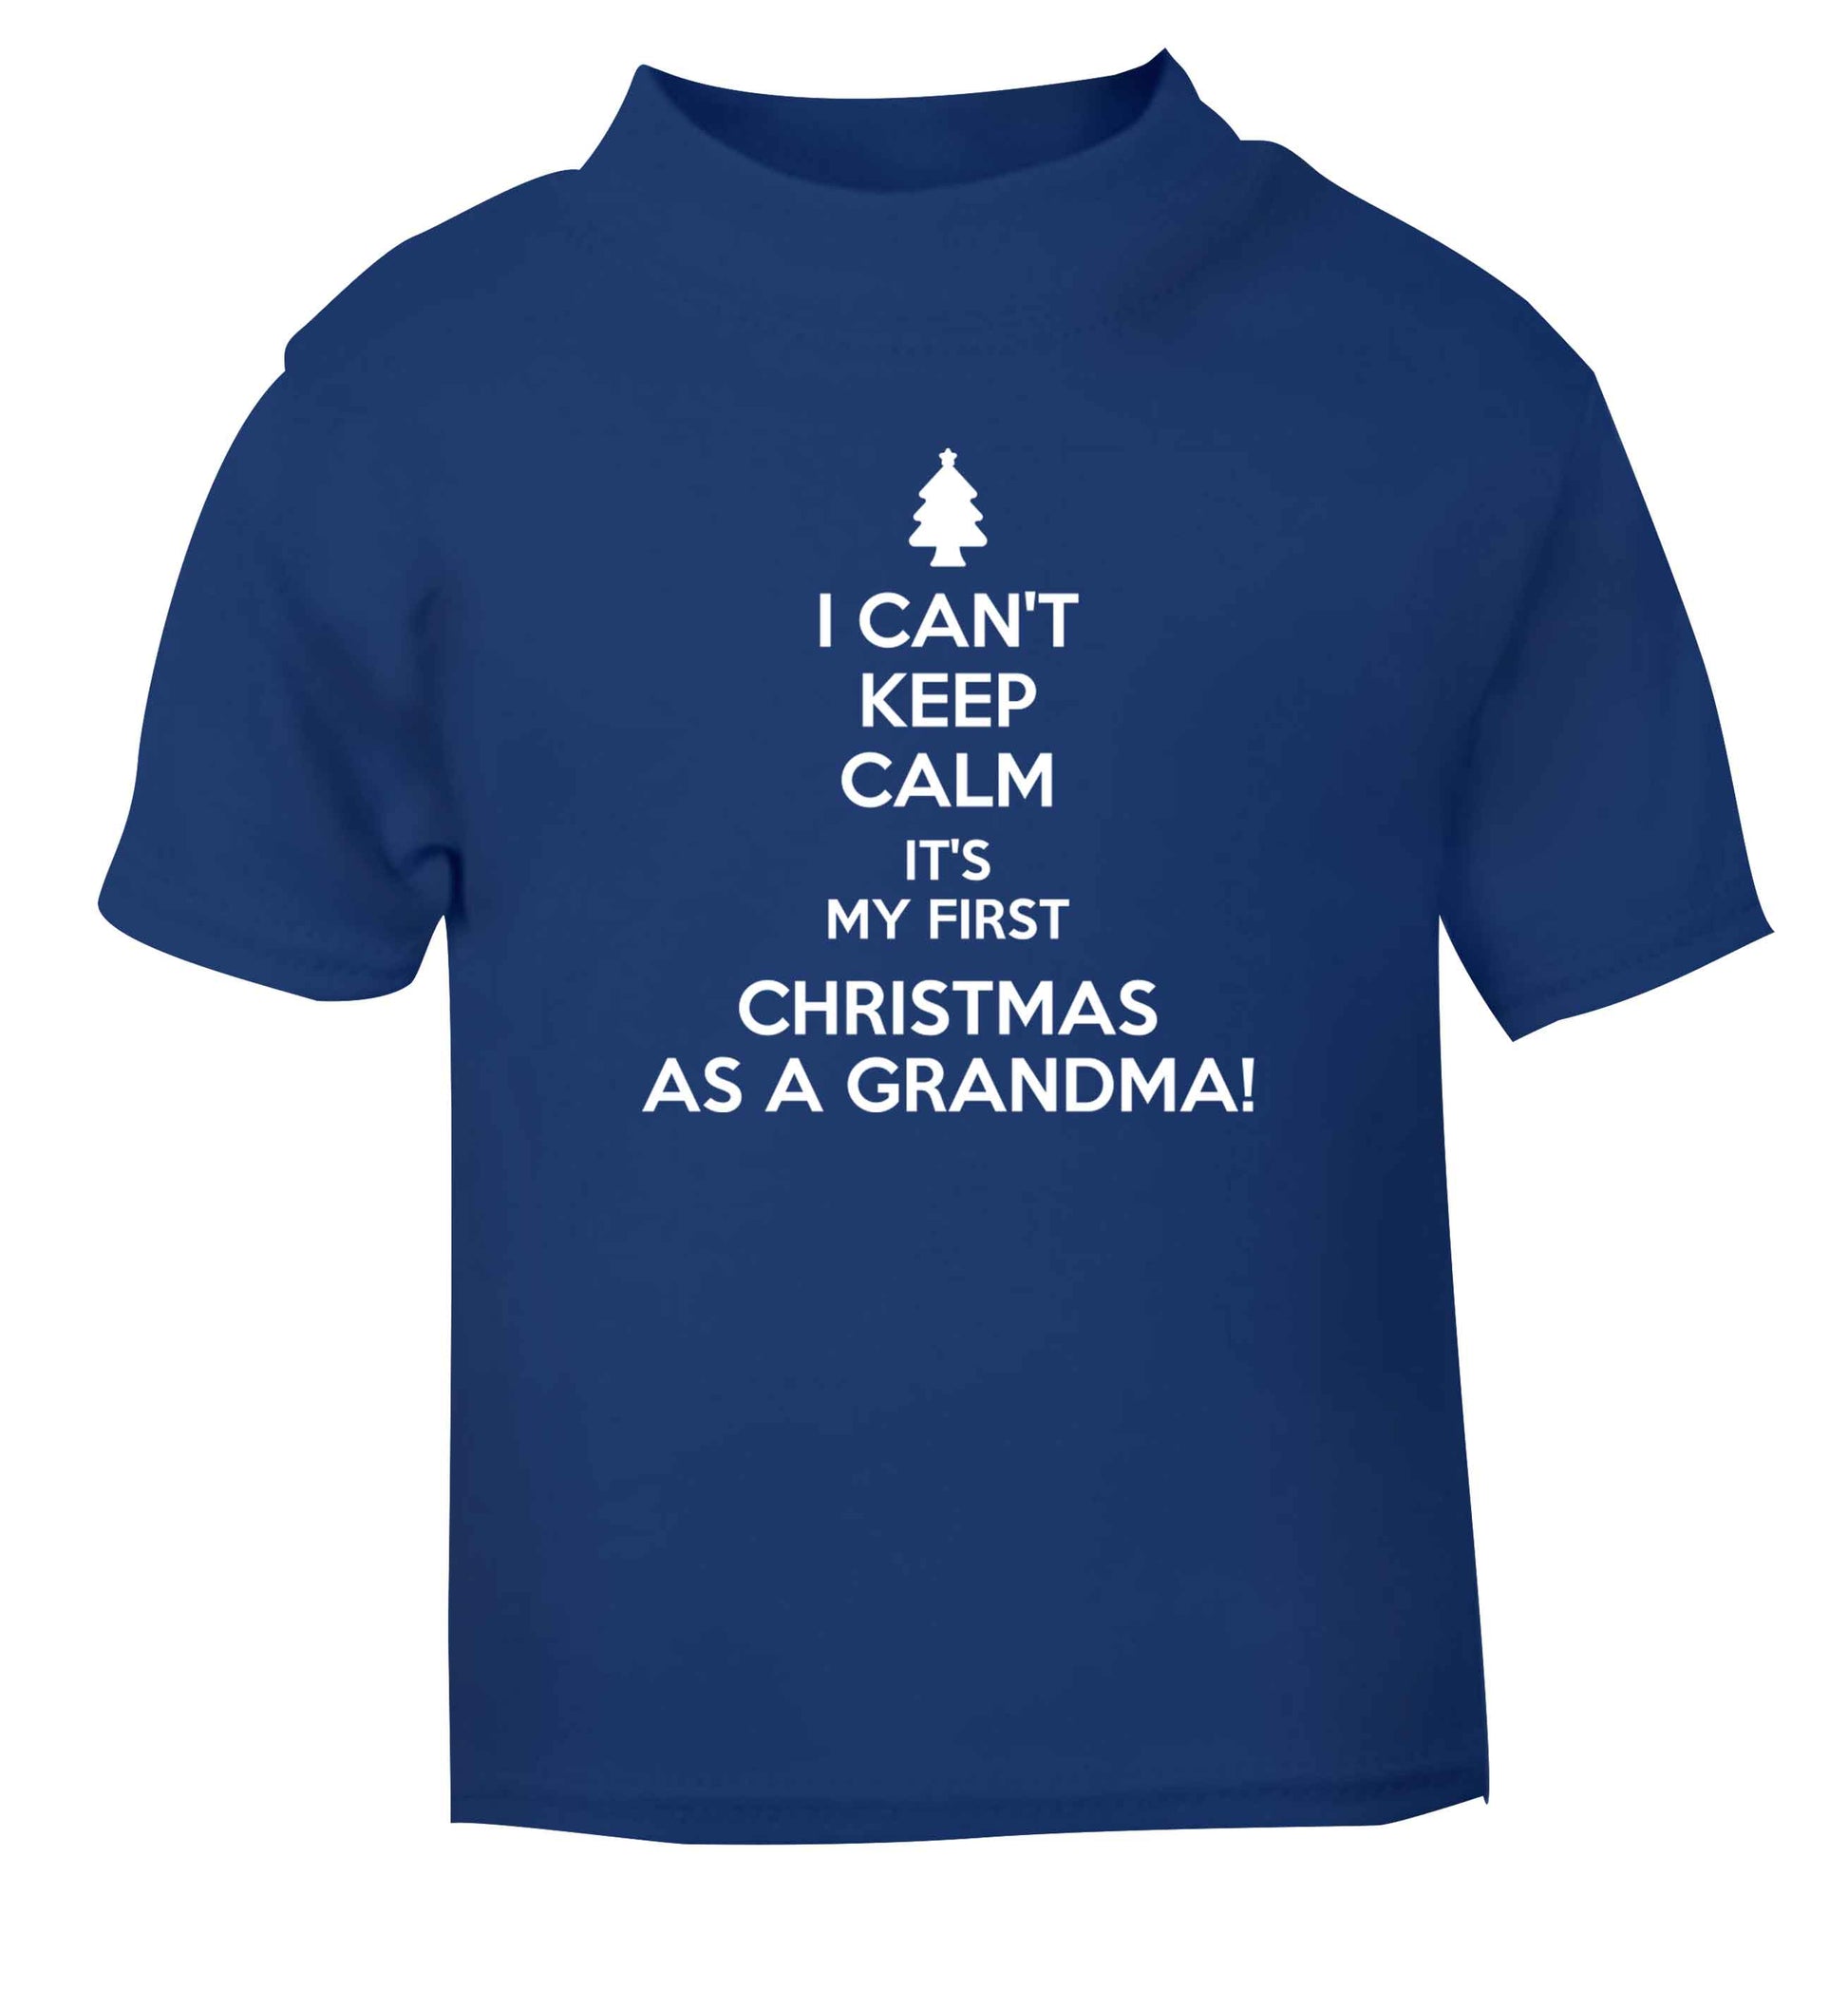 I can't keep calm it's my first Christmas as a grandma! blue Baby Toddler Tshirt 2 Years